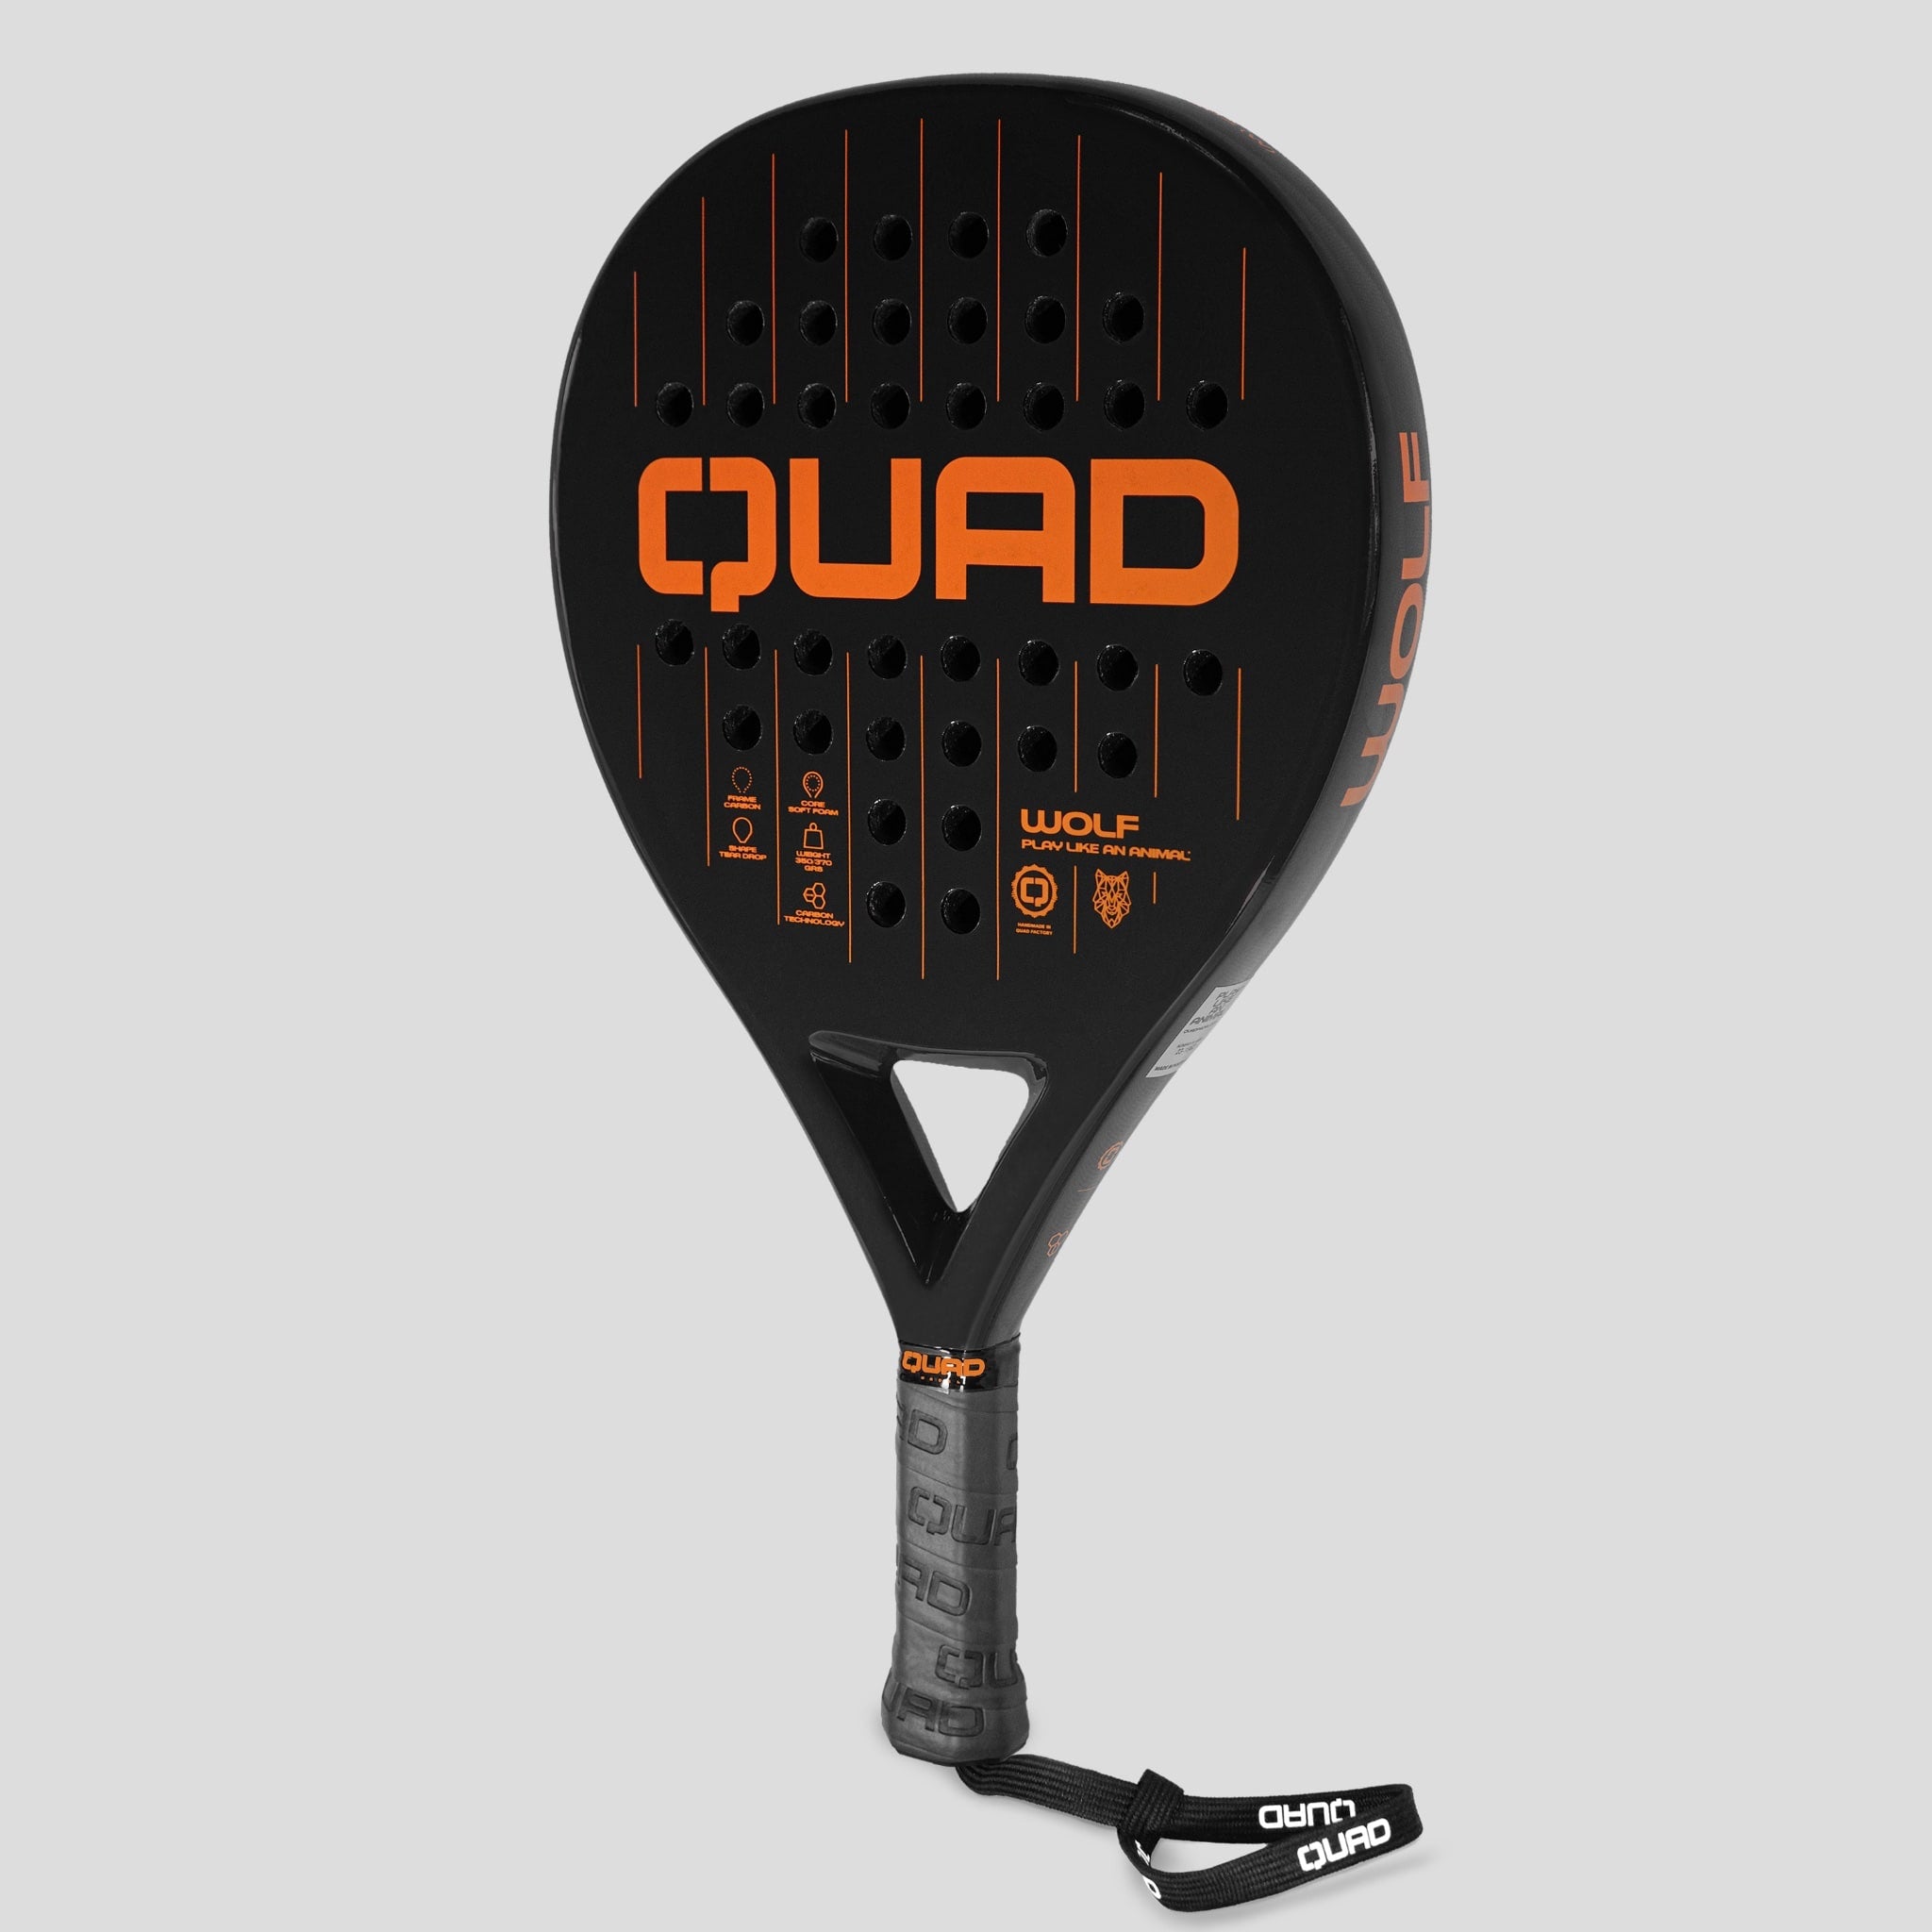 Quad Padel Wolf Racket right side